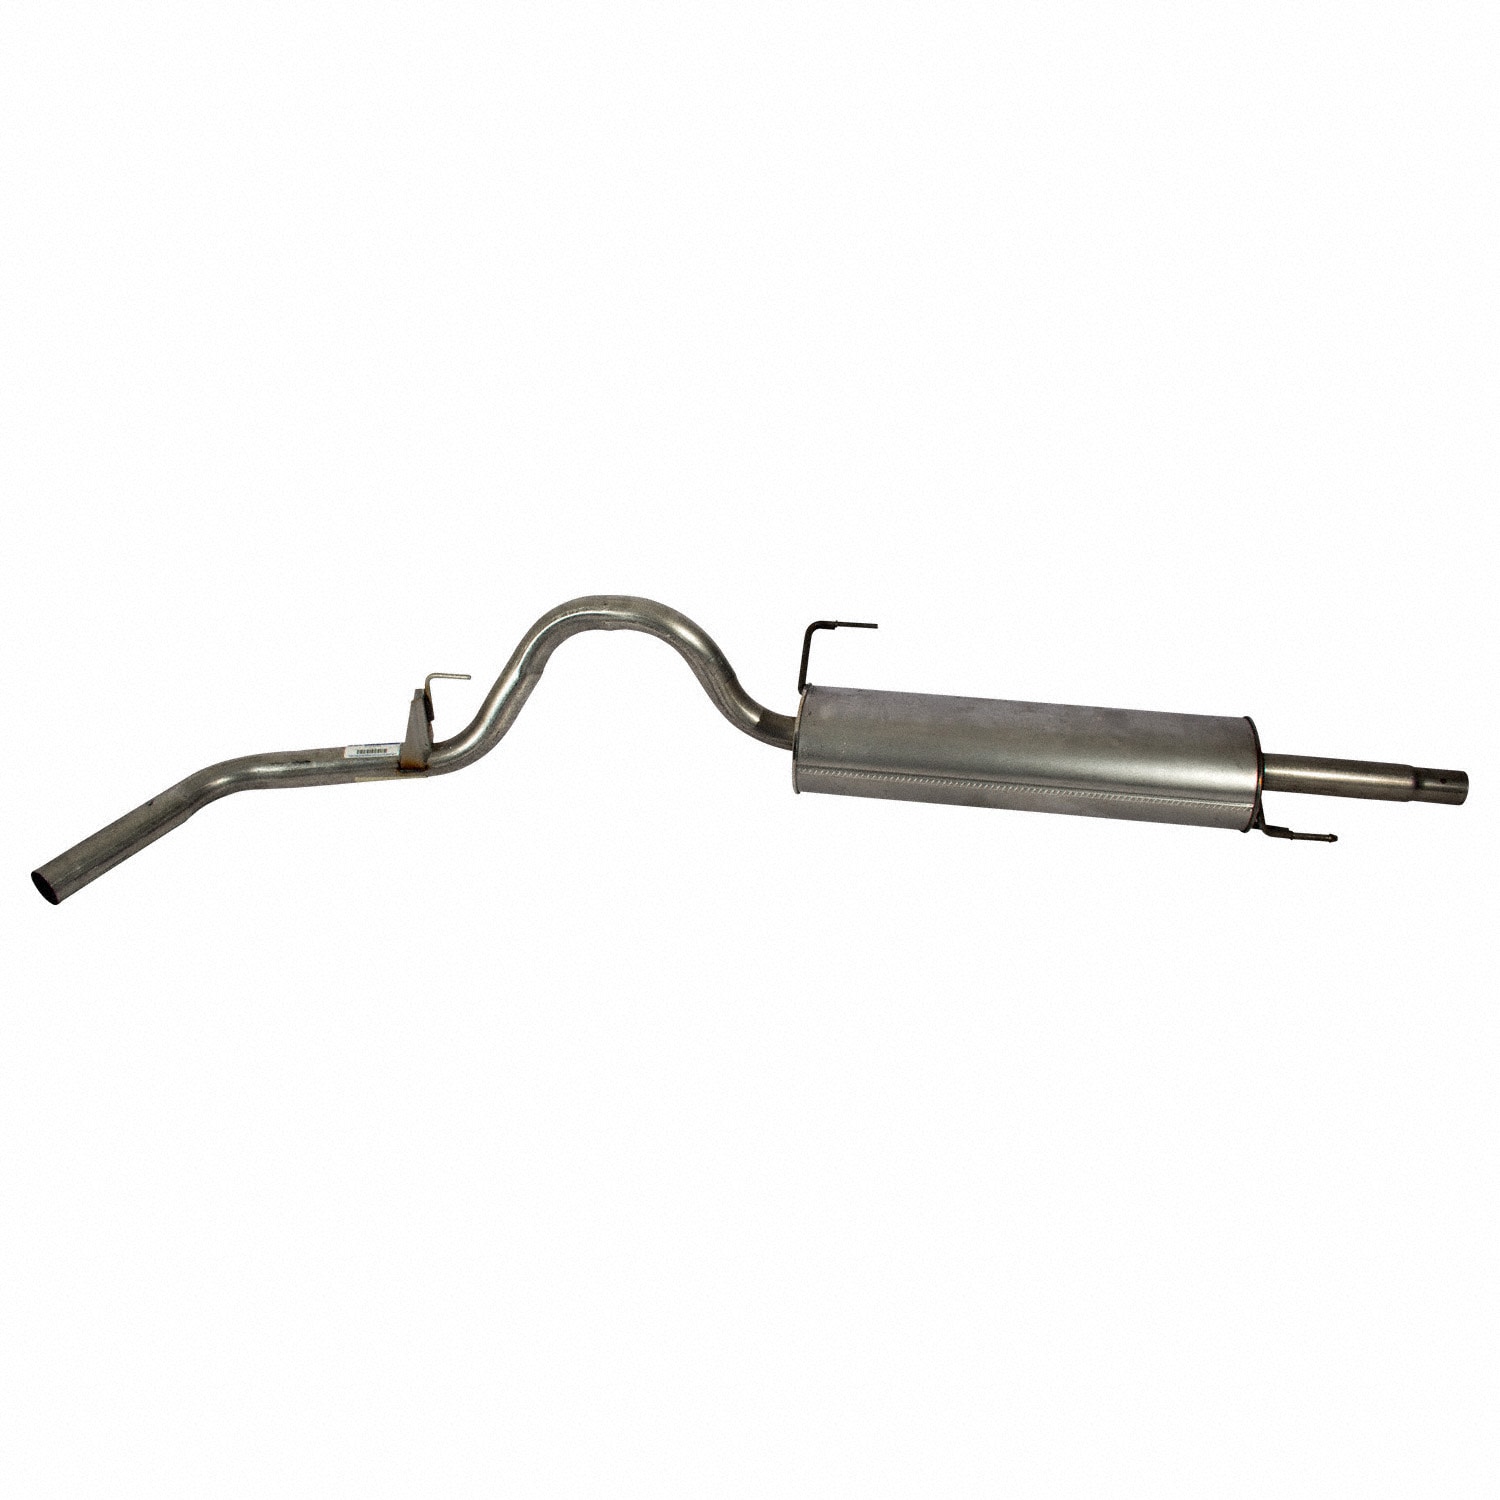 Ford® Motorcraft® Exhaust System Parts – Mufflers : FordParts.com